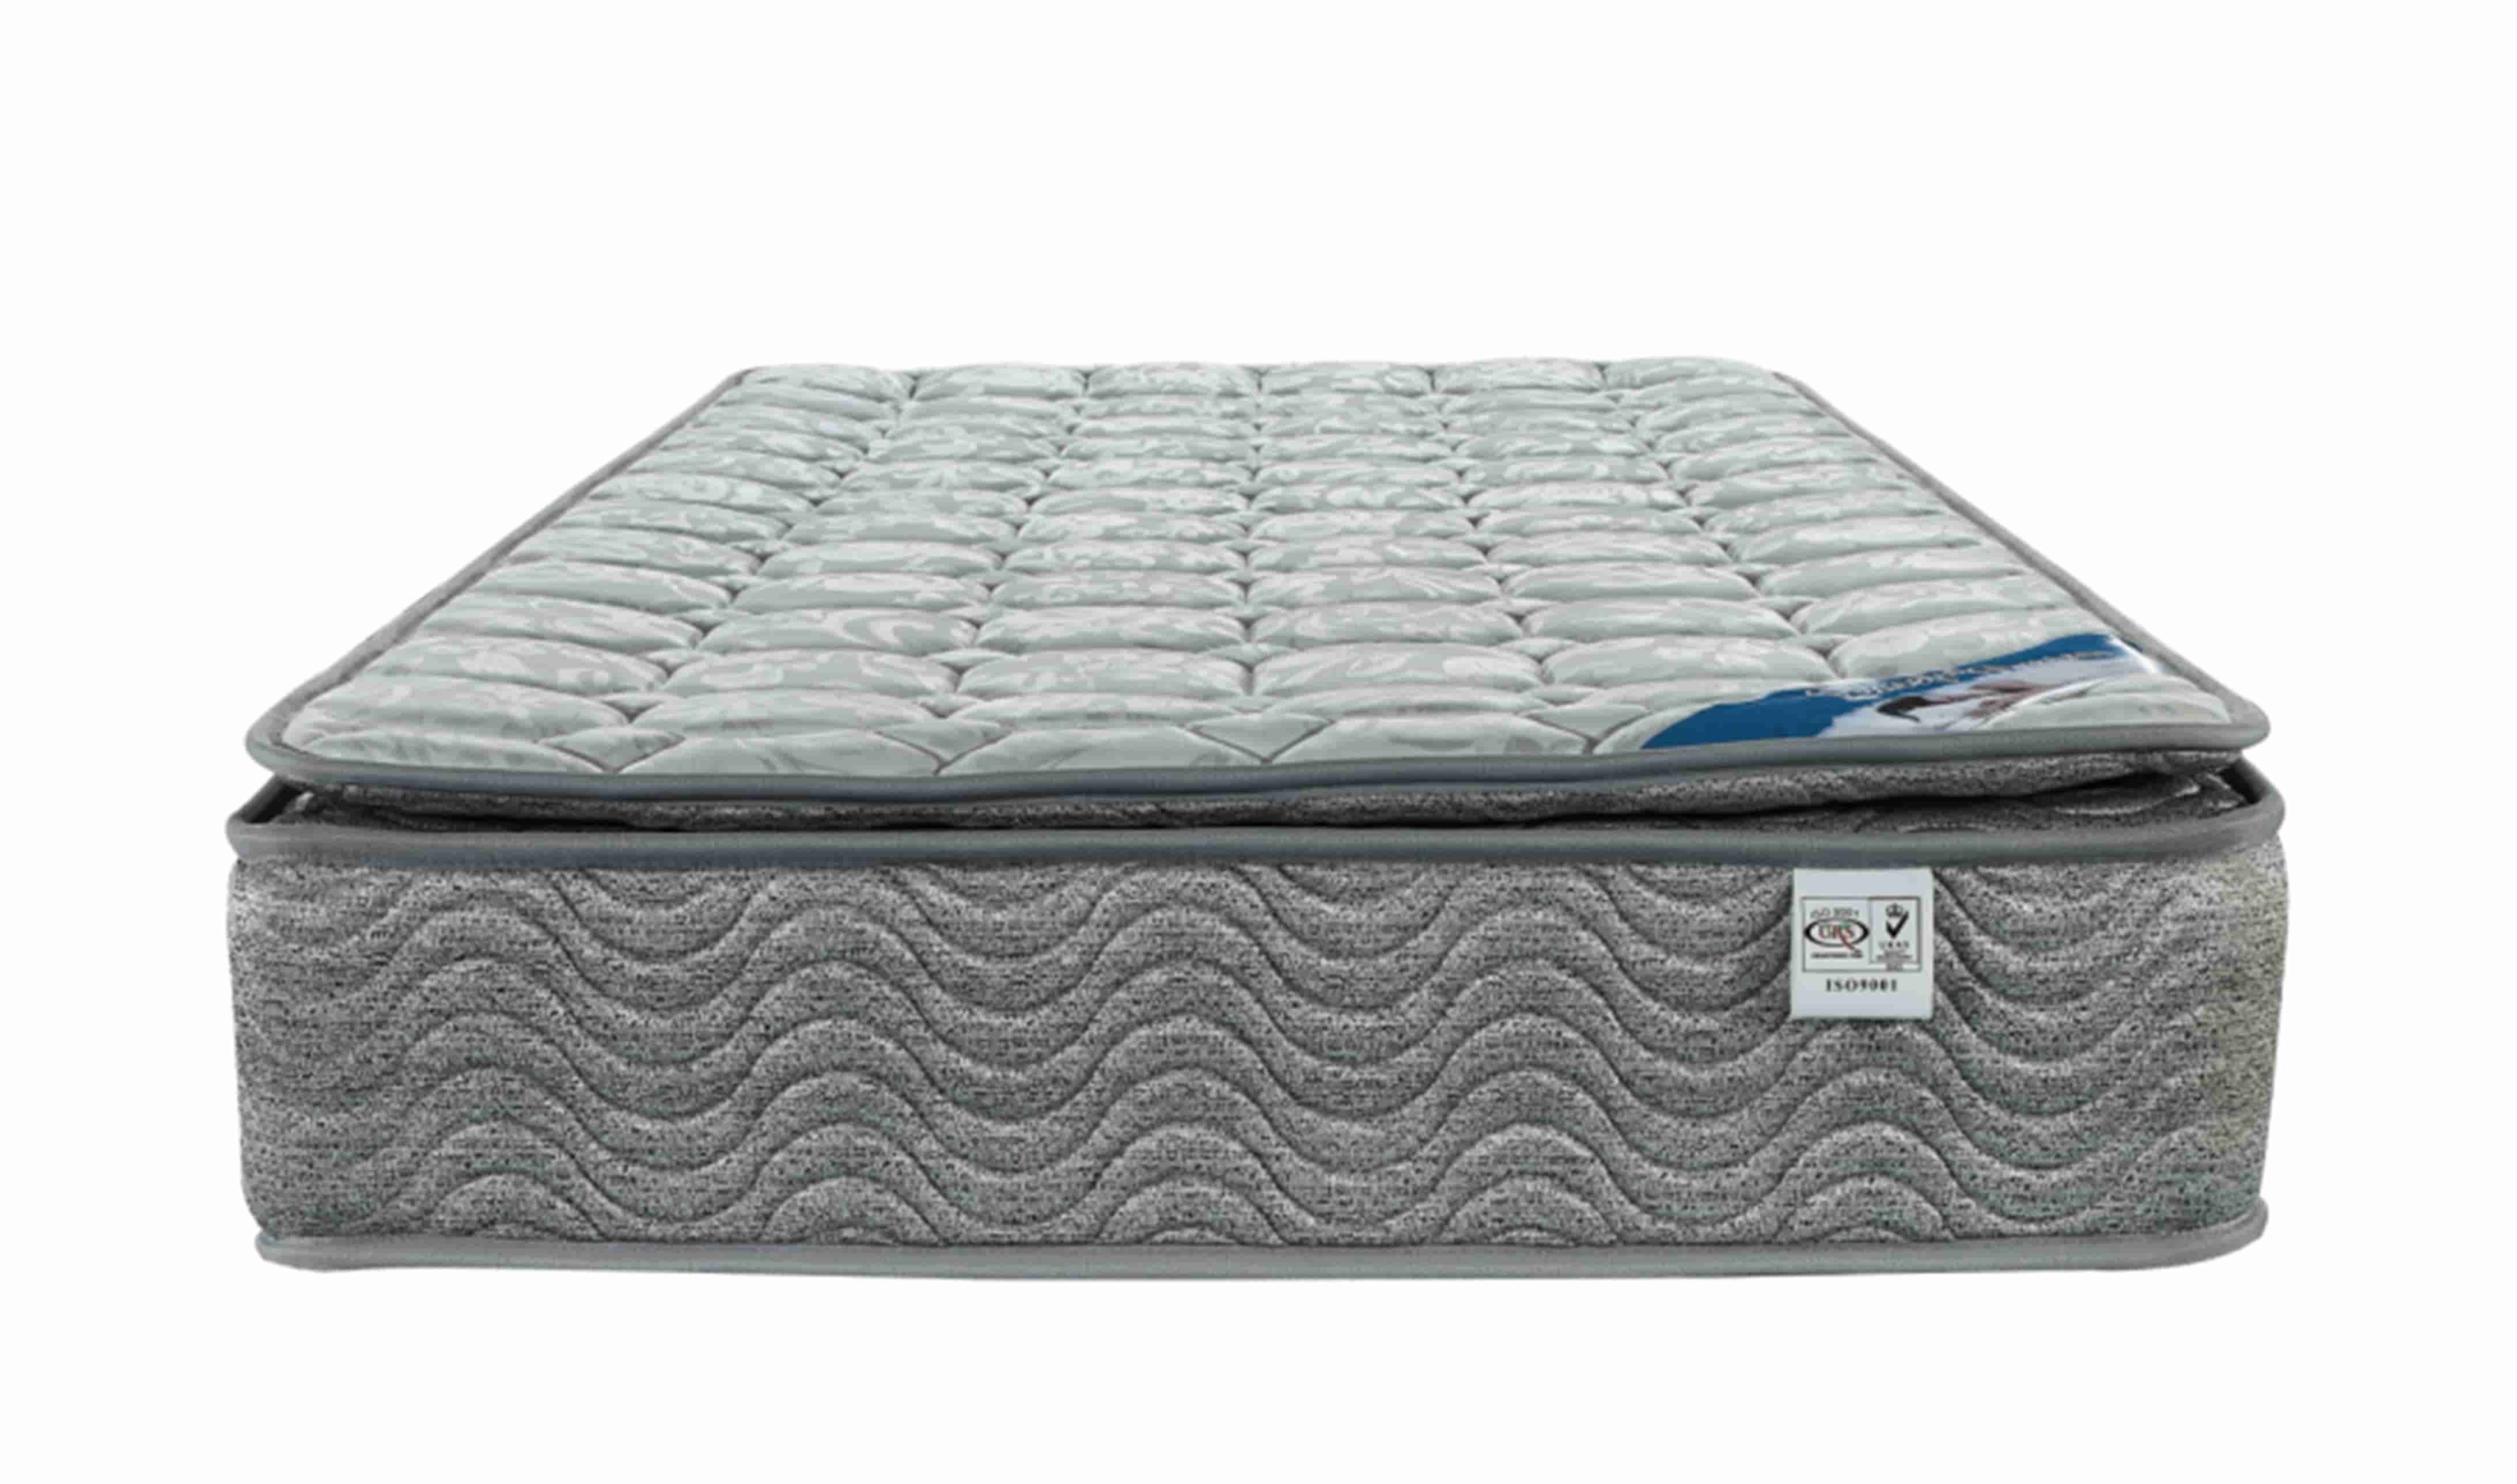 Bedroom Double Queen King Size Sleep Well Continuous Spring Mattress